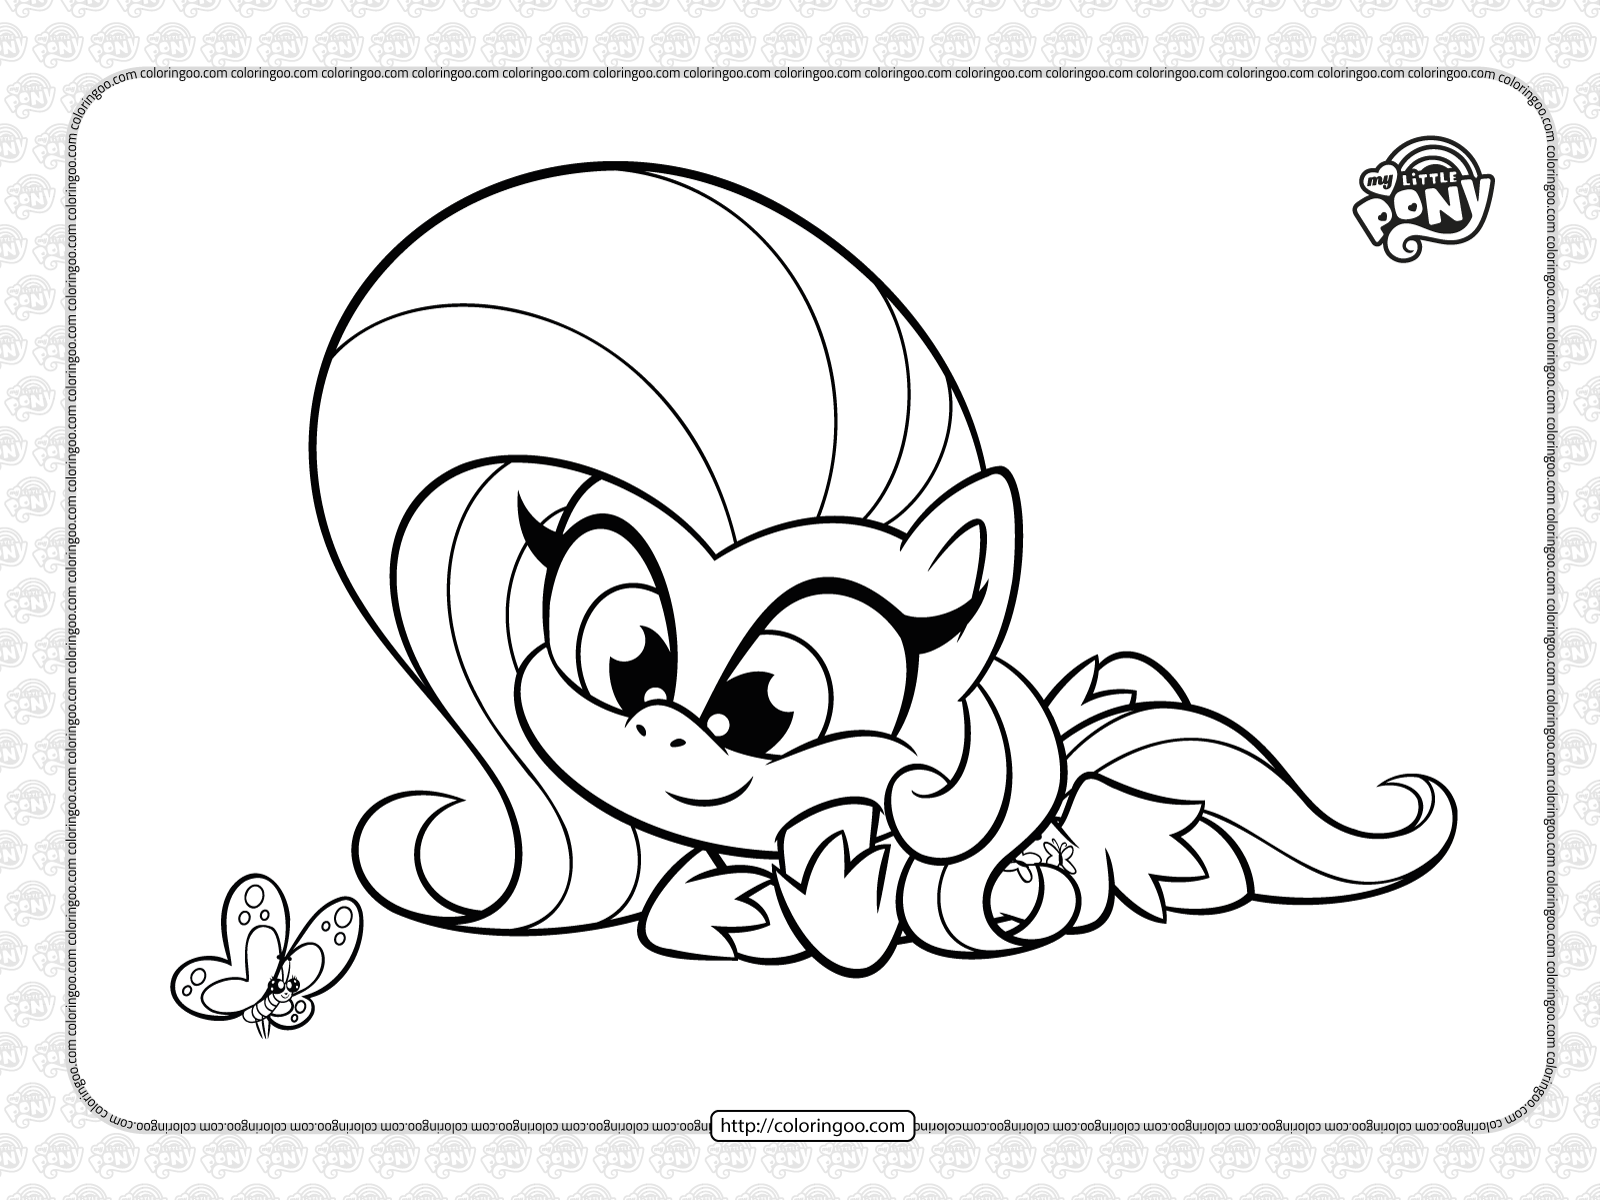 MLP Pony Life Fluttershy Coloring Page for Kids by ColoringooCom ...